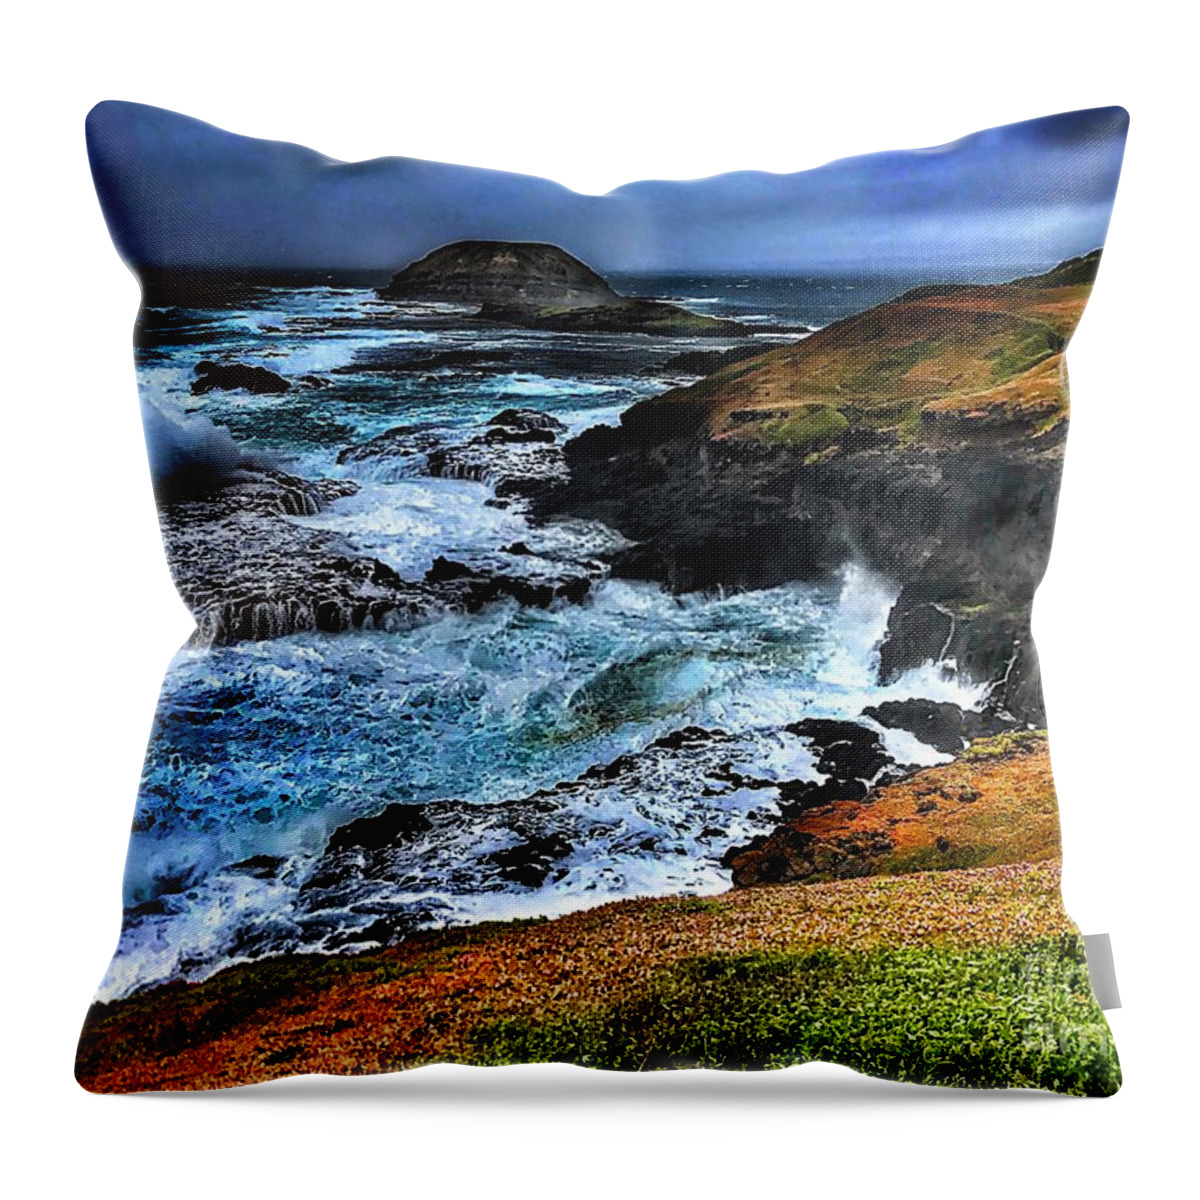 Nobbies Throw Pillow featuring the photograph Nobbies Blowhole by Blair Stuart